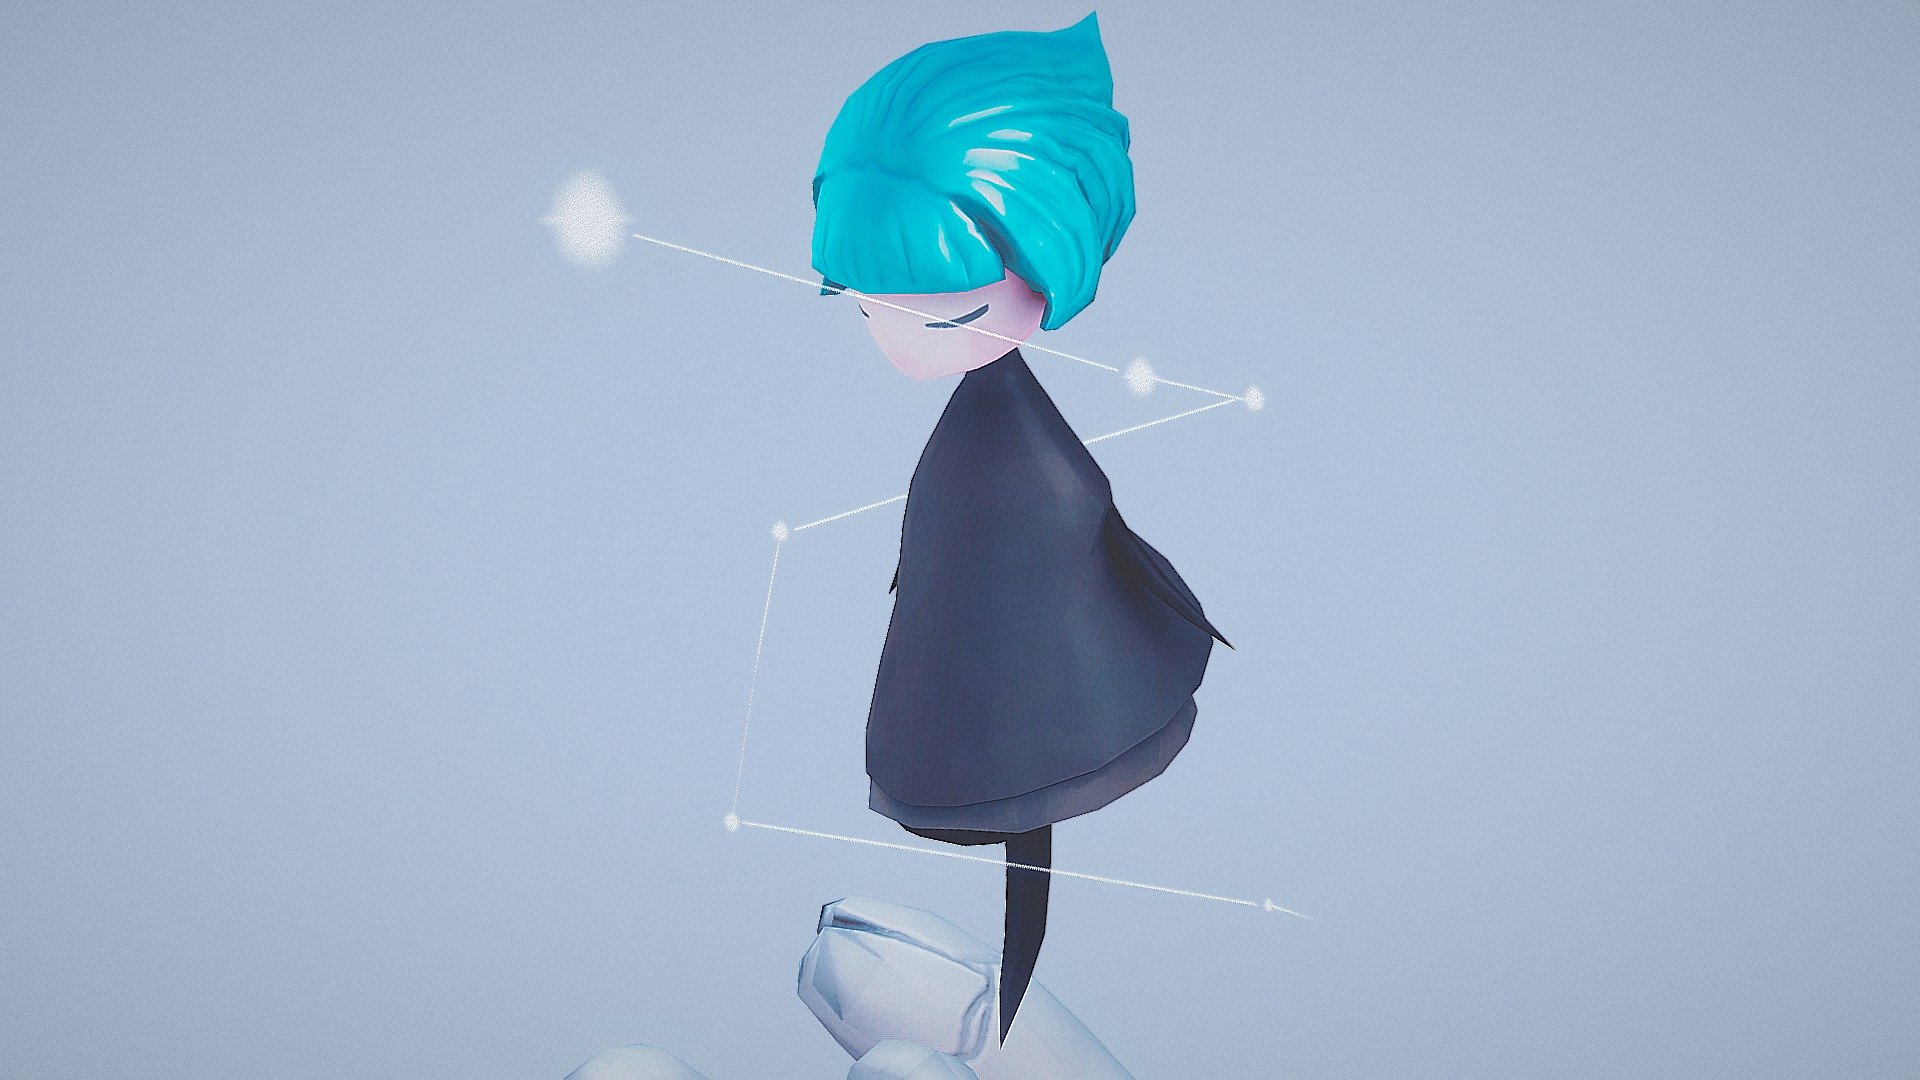 Low poly model based on GRIS, a game by Nomada Studio



Made in Maya, highpoly in Zbrush, painted in Substance Painter 3d model